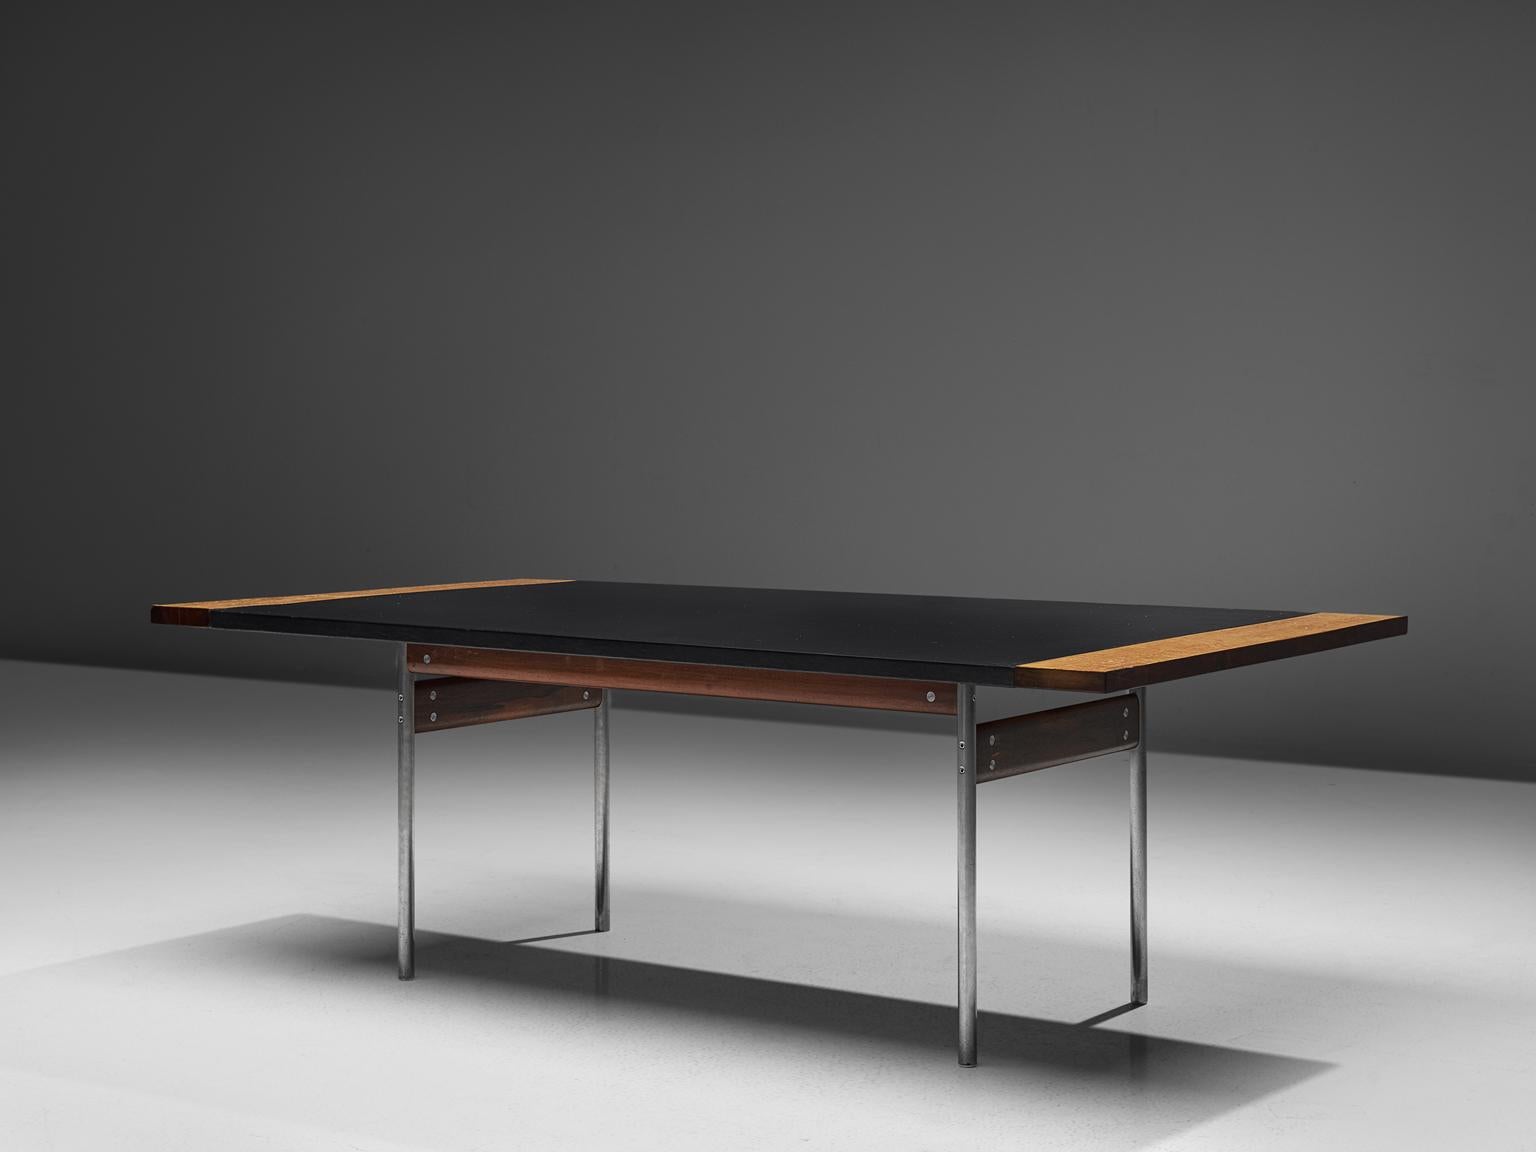 Sven Ivar Dysthe for Dokka, table, leather, rosewood and steel, Norway, 1960s.

This well crafted executive dining table in walnut is designed by Sven Ivar Dysthe. The tabletop is finished with luxurious black leather, which shows minor signs of